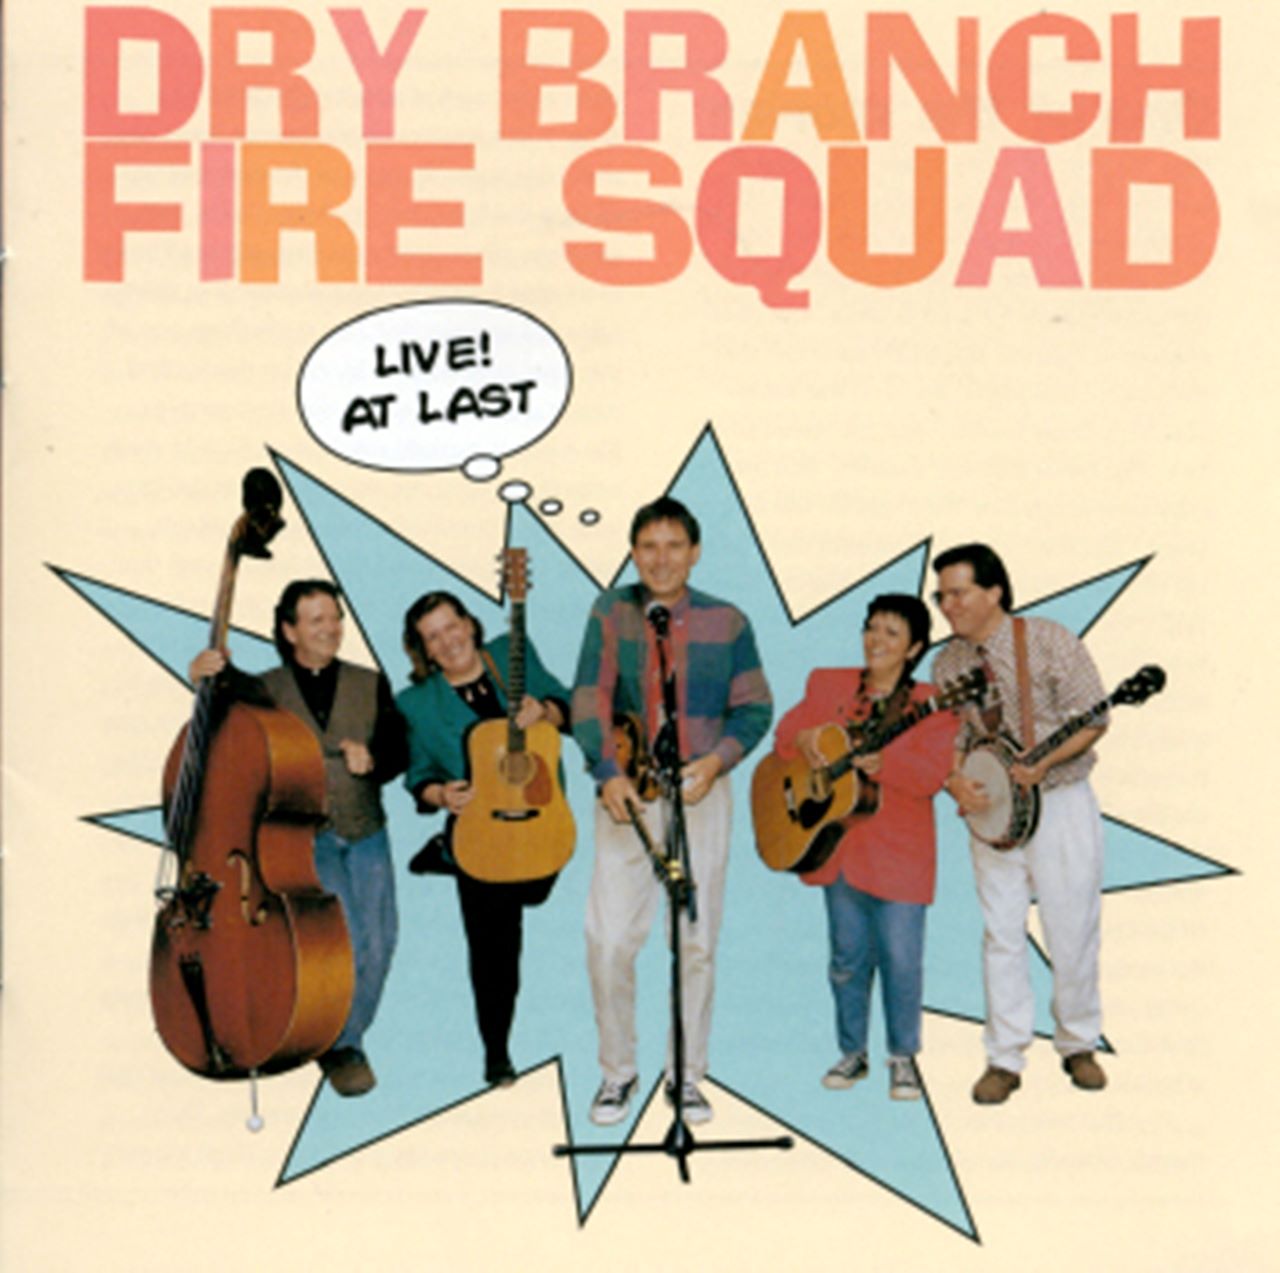 Dry Branch Fire Squad - Live! At Last cover album